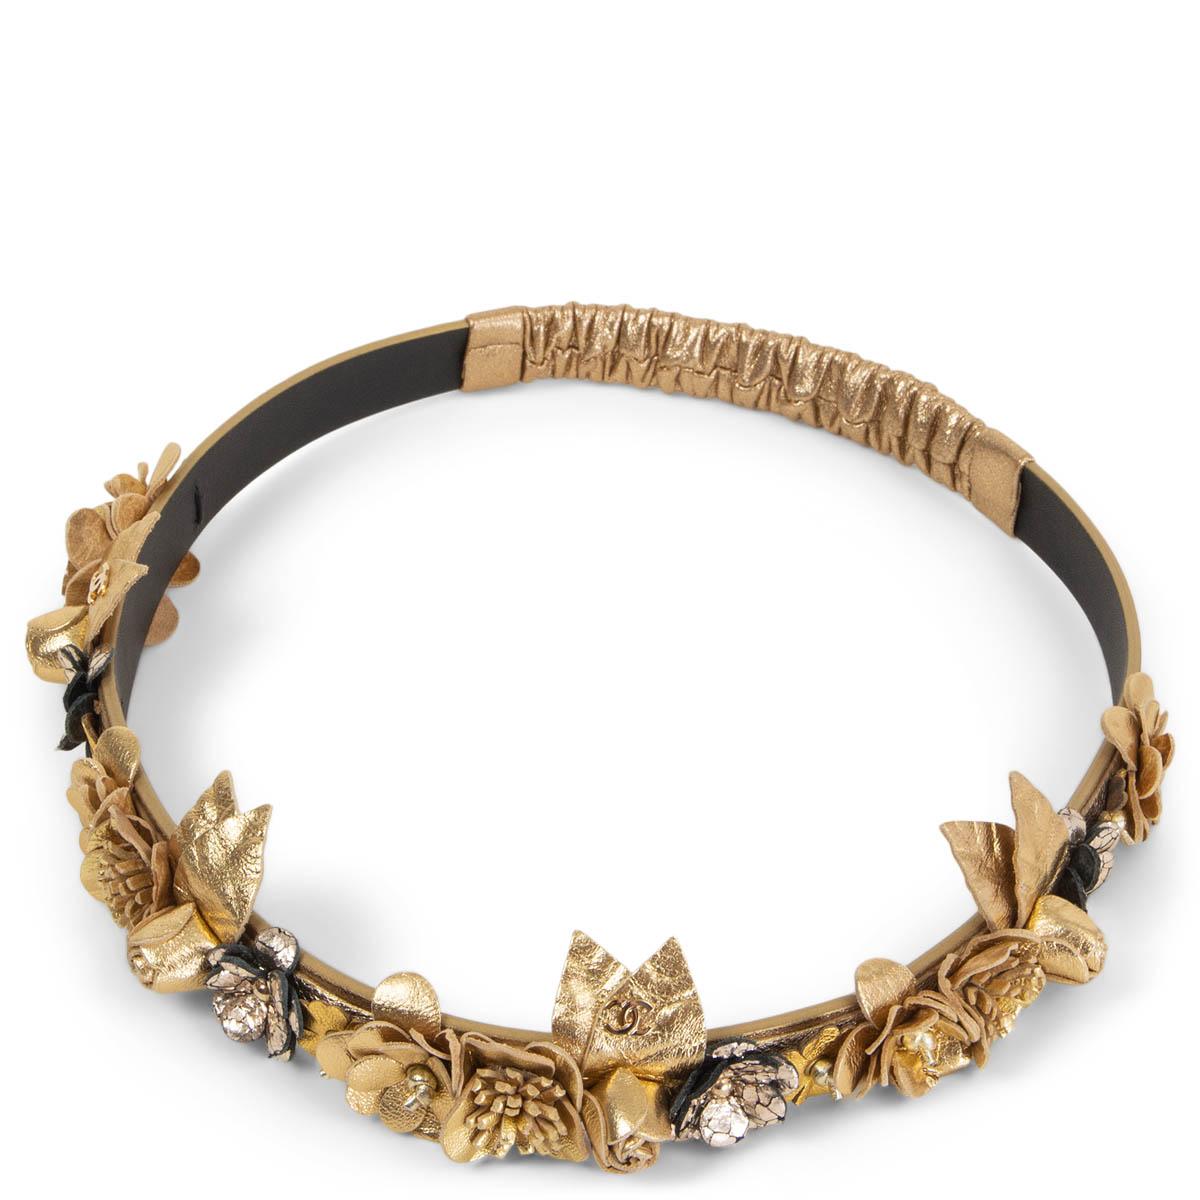 100% authentic Chanel flower embellished calfskin headband in metallic gold-tone. Has various sized camilla flowers in different shades of gold, with a mini Chanel CC logo, and a elastic band on the back. Has been worn and is in excellent condition.